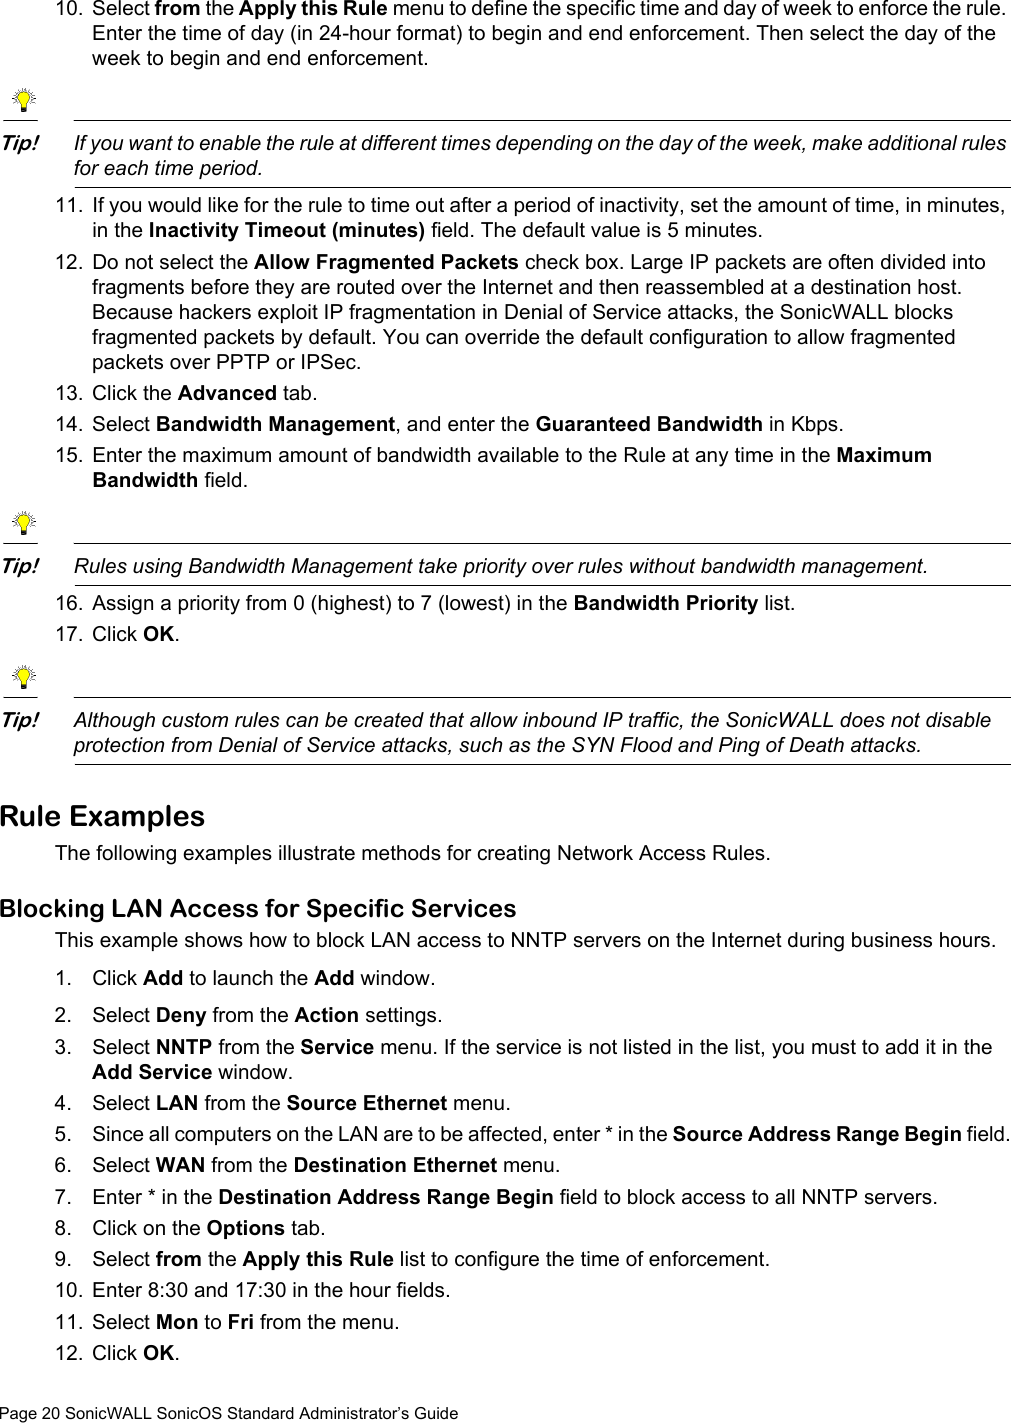 Page 20 SonicWALL SonicOS Standard Administrator’s Guide10. Select from the Apply this Rule menu to define the specific time and day of week to enforce the rule. Enter the time of day (in 24-hour format) to begin and end enforcement. Then select the day of the week to begin and end enforcement. Tip!If you want to enable the rule at different times depending on the day of the week, make additional rules for each time period. 11. If you would like for the rule to time out after a period of inactivity, set the amount of time, in minutes, in the Inactivity Timeout (minutes) field. The default value is 5 minutes. 12. Do not select the Allow Fragmented Packets check box. Large IP packets are often divided into fragments before they are routed over the Internet and then reassembled at a destination host. Because hackers exploit IP fragmentation in Denial of Service attacks, the SonicWALL blocks fragmented packets by default. You can override the default configuration to allow fragmented packets over PPTP or IPSec.13. Click the Advanced tab. 14. Select Bandwidth Management, and enter the Guaranteed Bandwidth in Kbps. 15. Enter the maximum amount of bandwidth available to the Rule at any time in the Maximum Bandwidth field. Tip!Rules using Bandwidth Management take priority over rules without bandwidth management. 16. Assign a priority from 0 (highest) to 7 (lowest) in the Bandwidth Priority list. 17. Click OK.Tip!Although custom rules can be created that allow inbound IP traffic, the SonicWALL does not disable protection from Denial of Service attacks, such as the SYN Flood and Ping of Death attacks. Rule ExamplesThe following examples illustrate methods for creating Network Access Rules. Blocking LAN Access for Specific Services This example shows how to block LAN access to NNTP servers on the Internet during business hours.1. Click Add to launch the Add window.2. Select Deny from the Action settings.3. Select NNTP from the Service menu. If the service is not listed in the list, you must to add it in the Add Service window.4. Select LAN from the Source Ethernet menu.5. Since all computers on the LAN are to be affected, enter * in the Source Address Range Begin field.6. Select WAN from the Destination Ethernet menu.7. Enter * in the Destination Address Range Begin field to block access to all NNTP servers.8. Click on the Options tab.9. Select from the Apply this Rule list to configure the time of enforcement.10. Enter 8:30 and 17:30 in the hour fields.11. Select Mon to Fri from the menu.12. Click OK.